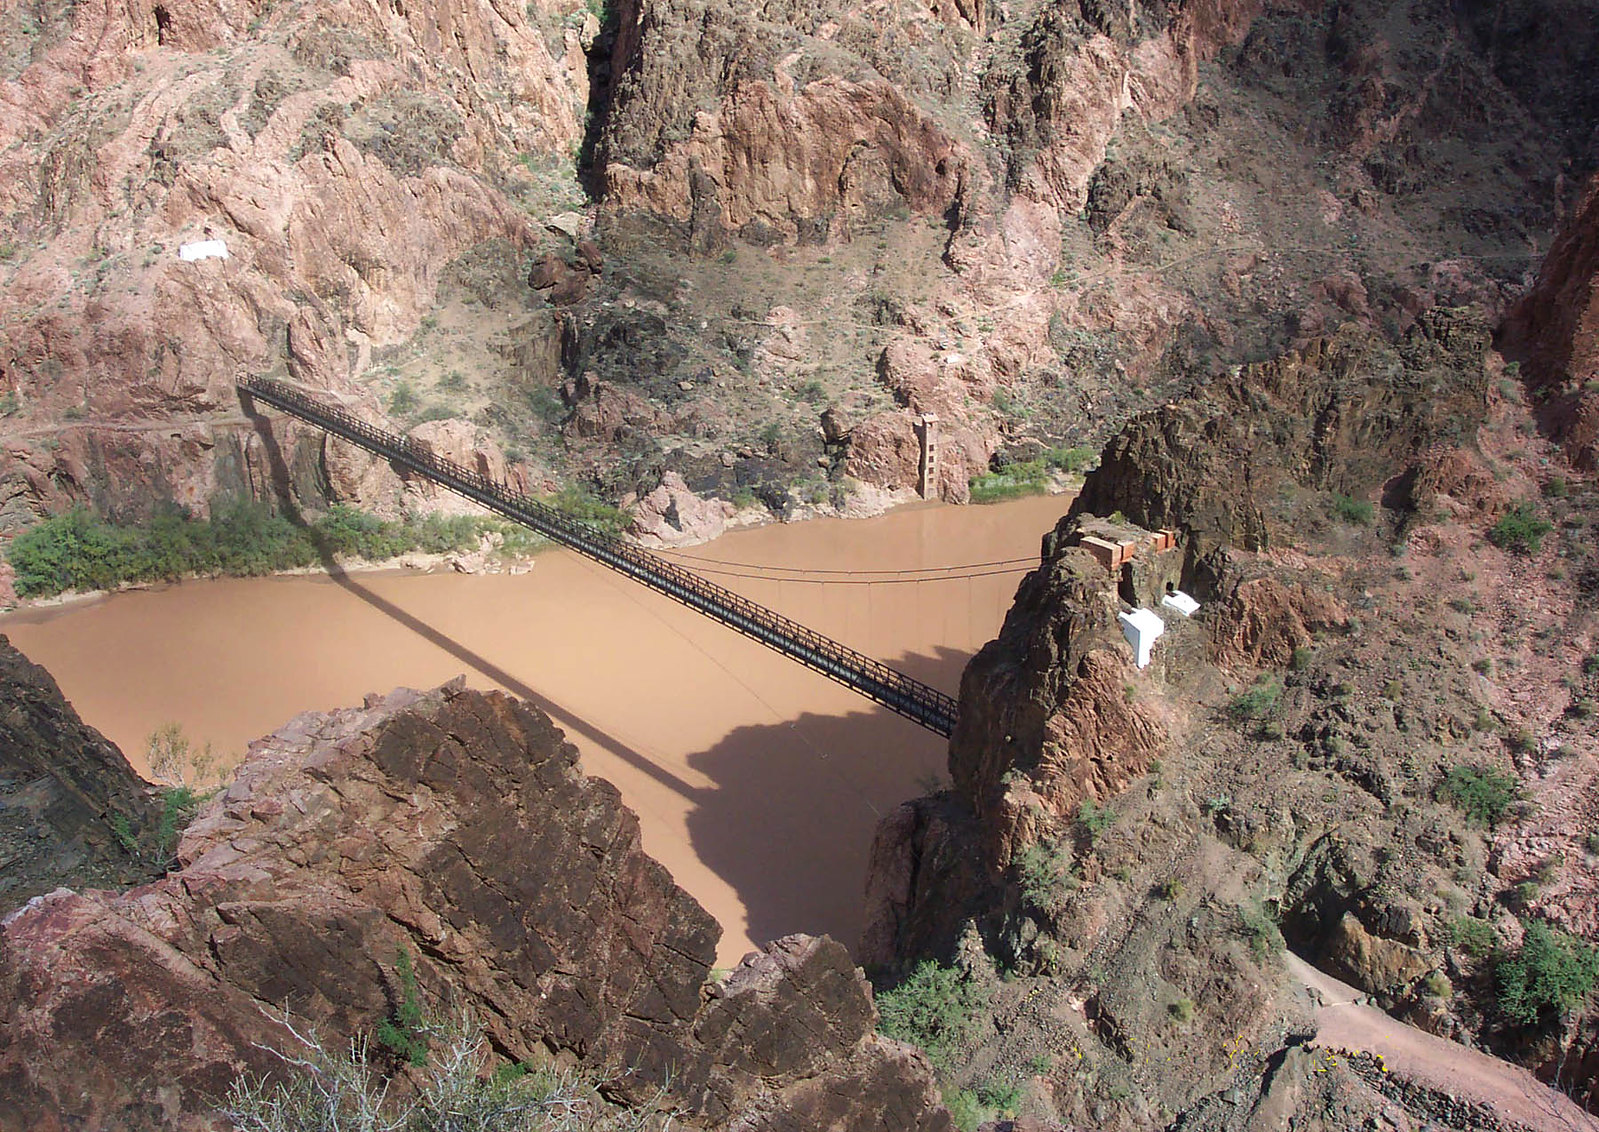 View looking towards the Colorado River from the South Kaibab Trail. The Kaibab Suspension Bridge can be seen spanning the length of the Colorado River.